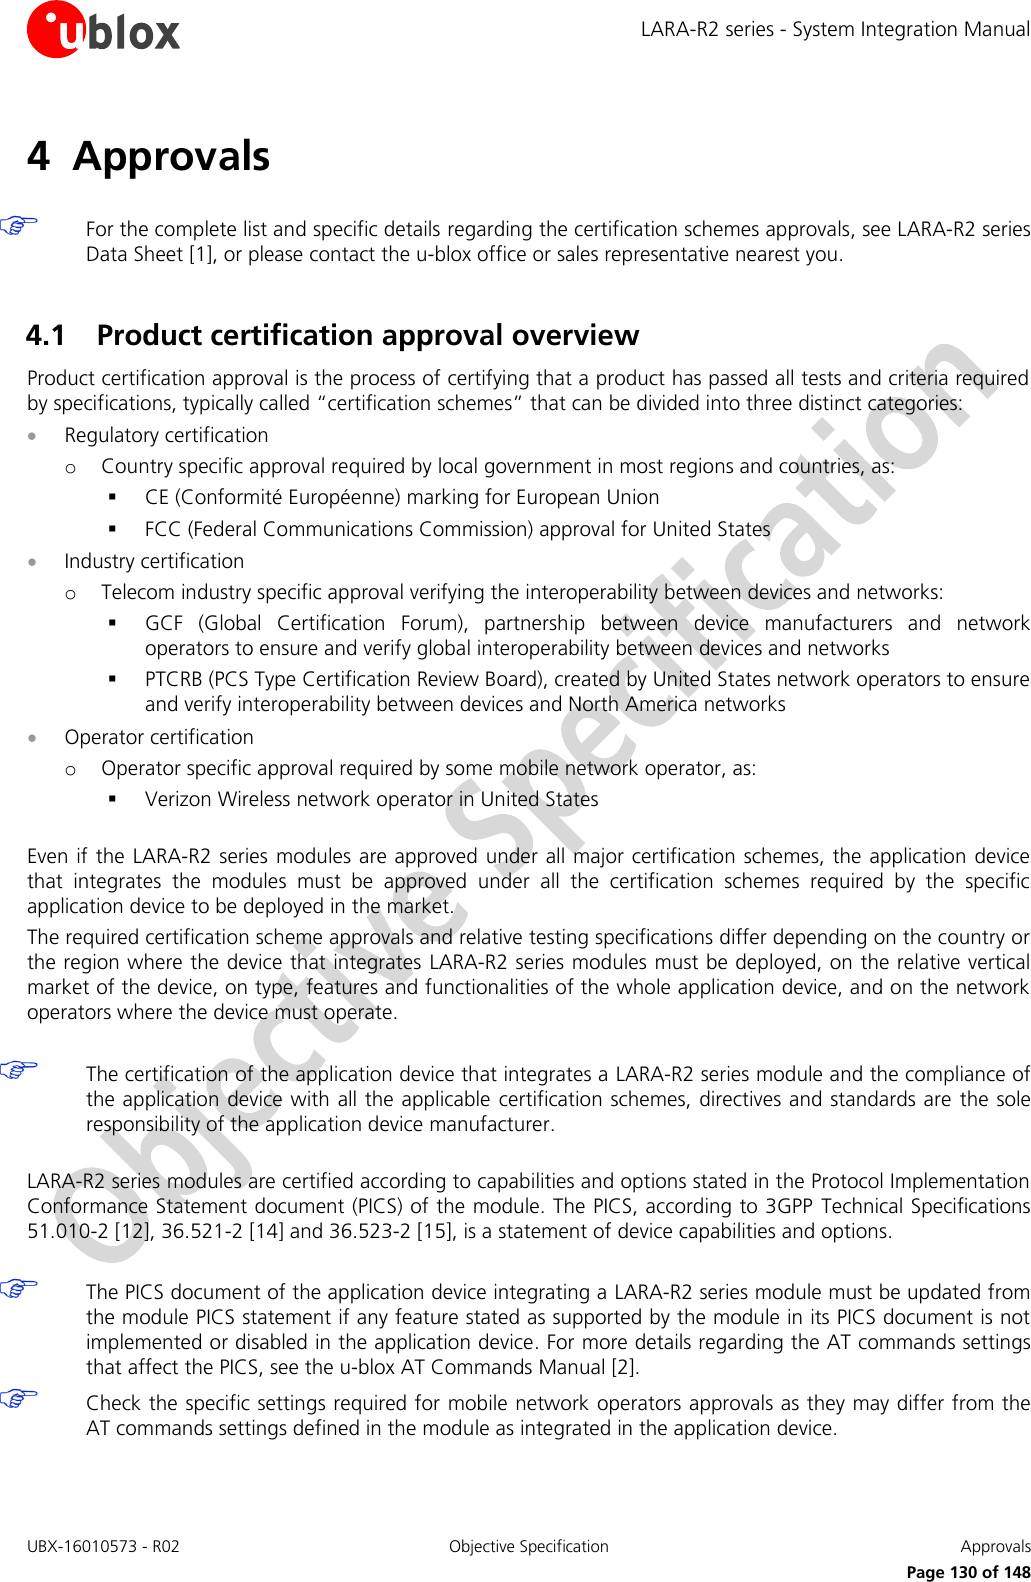 LARA-R2 series - System Integration Manual UBX-16010573 - R02  Objective Specification  Approvals     Page 130 of 148 4 Approvals   For the complete list and specific details regarding the certification schemes approvals, see LARA-R2 series Data Sheet [1], or please contact the u-blox office or sales representative nearest you.  4.1 Product certification approval overview Product certification approval is the process of certifying that a product has passed all tests and criteria required by specifications, typically called “certification schemes” that can be divided into three distinct categories:  Regulatory certification o Country specific approval required by local government in most regions and countries, as:  CE (Conformité Européenne) marking for European Union  FCC (Federal Communications Commission) approval for United States  Industry certification o Telecom industry specific approval verifying the interoperability between devices and networks:  GCF  (Global  Certification  Forum),  partnership  between  device  manufacturers  and  network operators to ensure and verify global interoperability between devices and networks  PTCRB (PCS Type Certification Review Board), created by United States network operators to ensure and verify interoperability between devices and North America networks  Operator certification o Operator specific approval required by some mobile network operator, as:  Verizon Wireless network operator in United States  Even if the LARA-R2  series modules are approved  under all major certification schemes, the application device that  integrates  the  modules  must  be  approved  under  all  the  certification  schemes  required  by  the  specific application device to be deployed in the market. The required certification scheme approvals and relative testing specifications differ depending on the country or the region where the device that integrates  LARA-R2 series modules must be deployed, on the relative vertical market of the device, on type, features and functionalities of the whole application device, and on the network operators where the device must operate.   The certification of the application device that integrates a LARA-R2 series module and the compliance of the application device with all the applicable  certification schemes, directives and standards are  the sole responsibility of the application device manufacturer.  LARA-R2 series modules are certified according to capabilities and options stated in the Protocol Implementation Conformance Statement document (PICS) of the module. The PICS, according to 3GPP  Technical Specifications 51.010-2 [12], 36.521-2 [14] and 36.523-2 [15], is a statement of device capabilities and options.   The PICS document of the application device integrating a LARA-R2 series module must be updated from the module PICS statement if any feature stated as supported by the module in its PICS document is not implemented or disabled in the application device. For more details regarding the AT commands settings that affect the PICS, see the u-blox AT Commands Manual [2].  Check the specific settings required for mobile network operators approvals as they may differ from the AT commands settings defined in the module as integrated in the application device.  